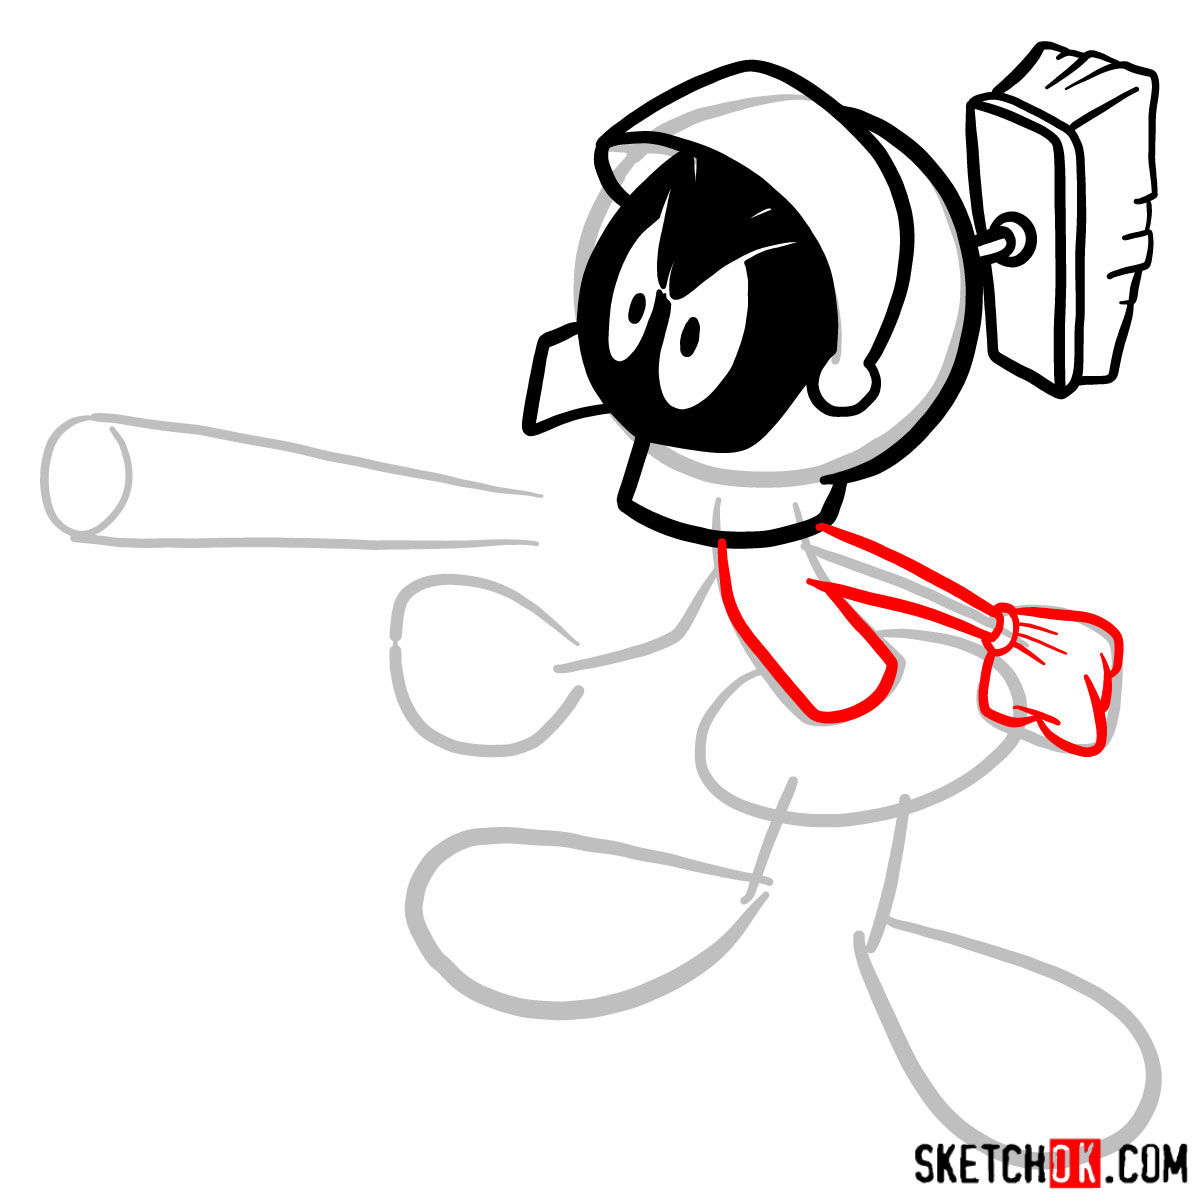 How to draw Marvin the Martian - step 05